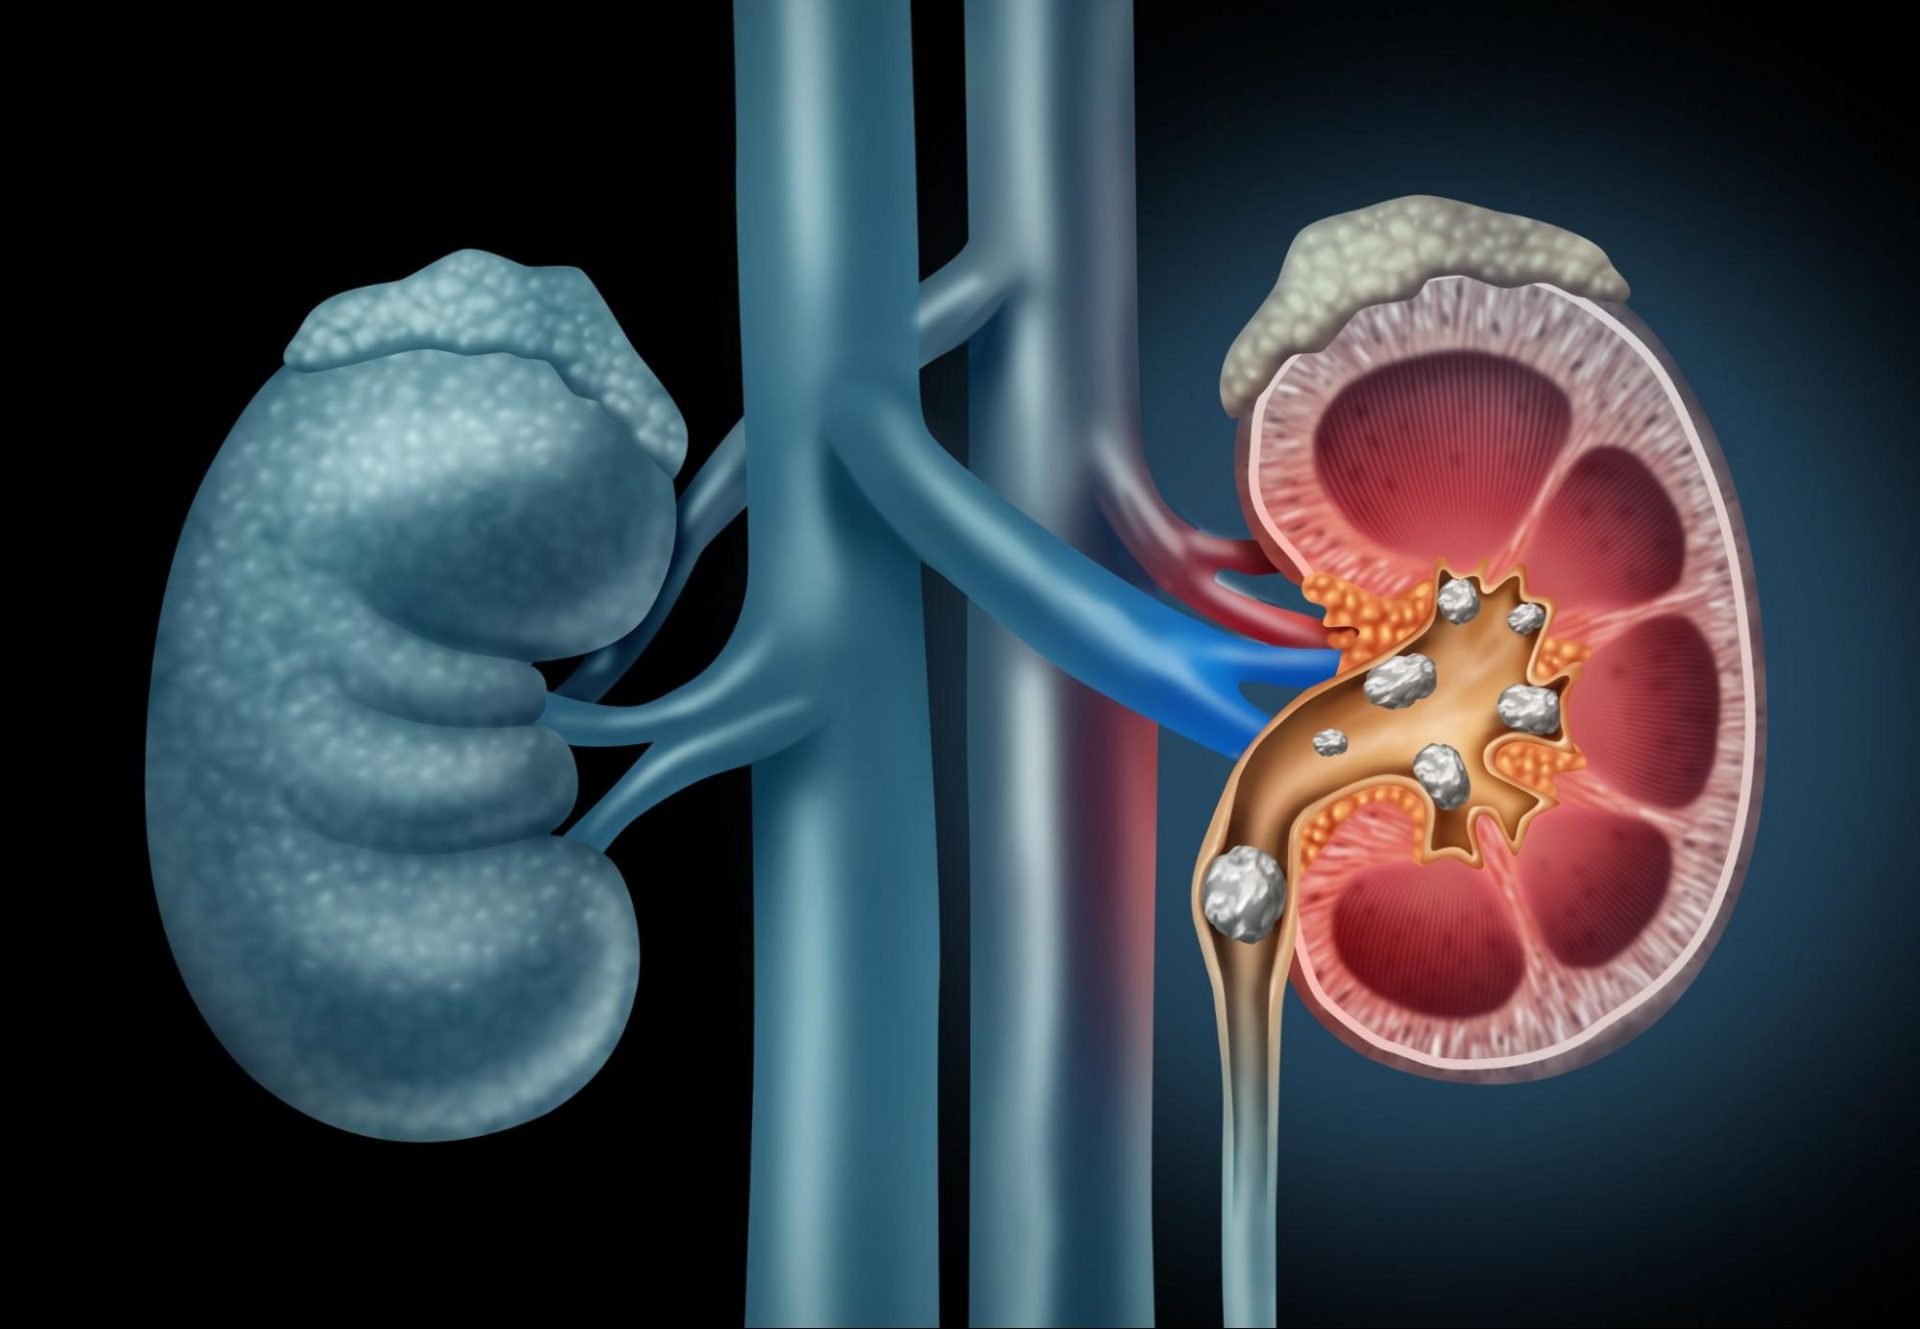 Kidney Pain: Causes, Treatment & When To Call A Doctor